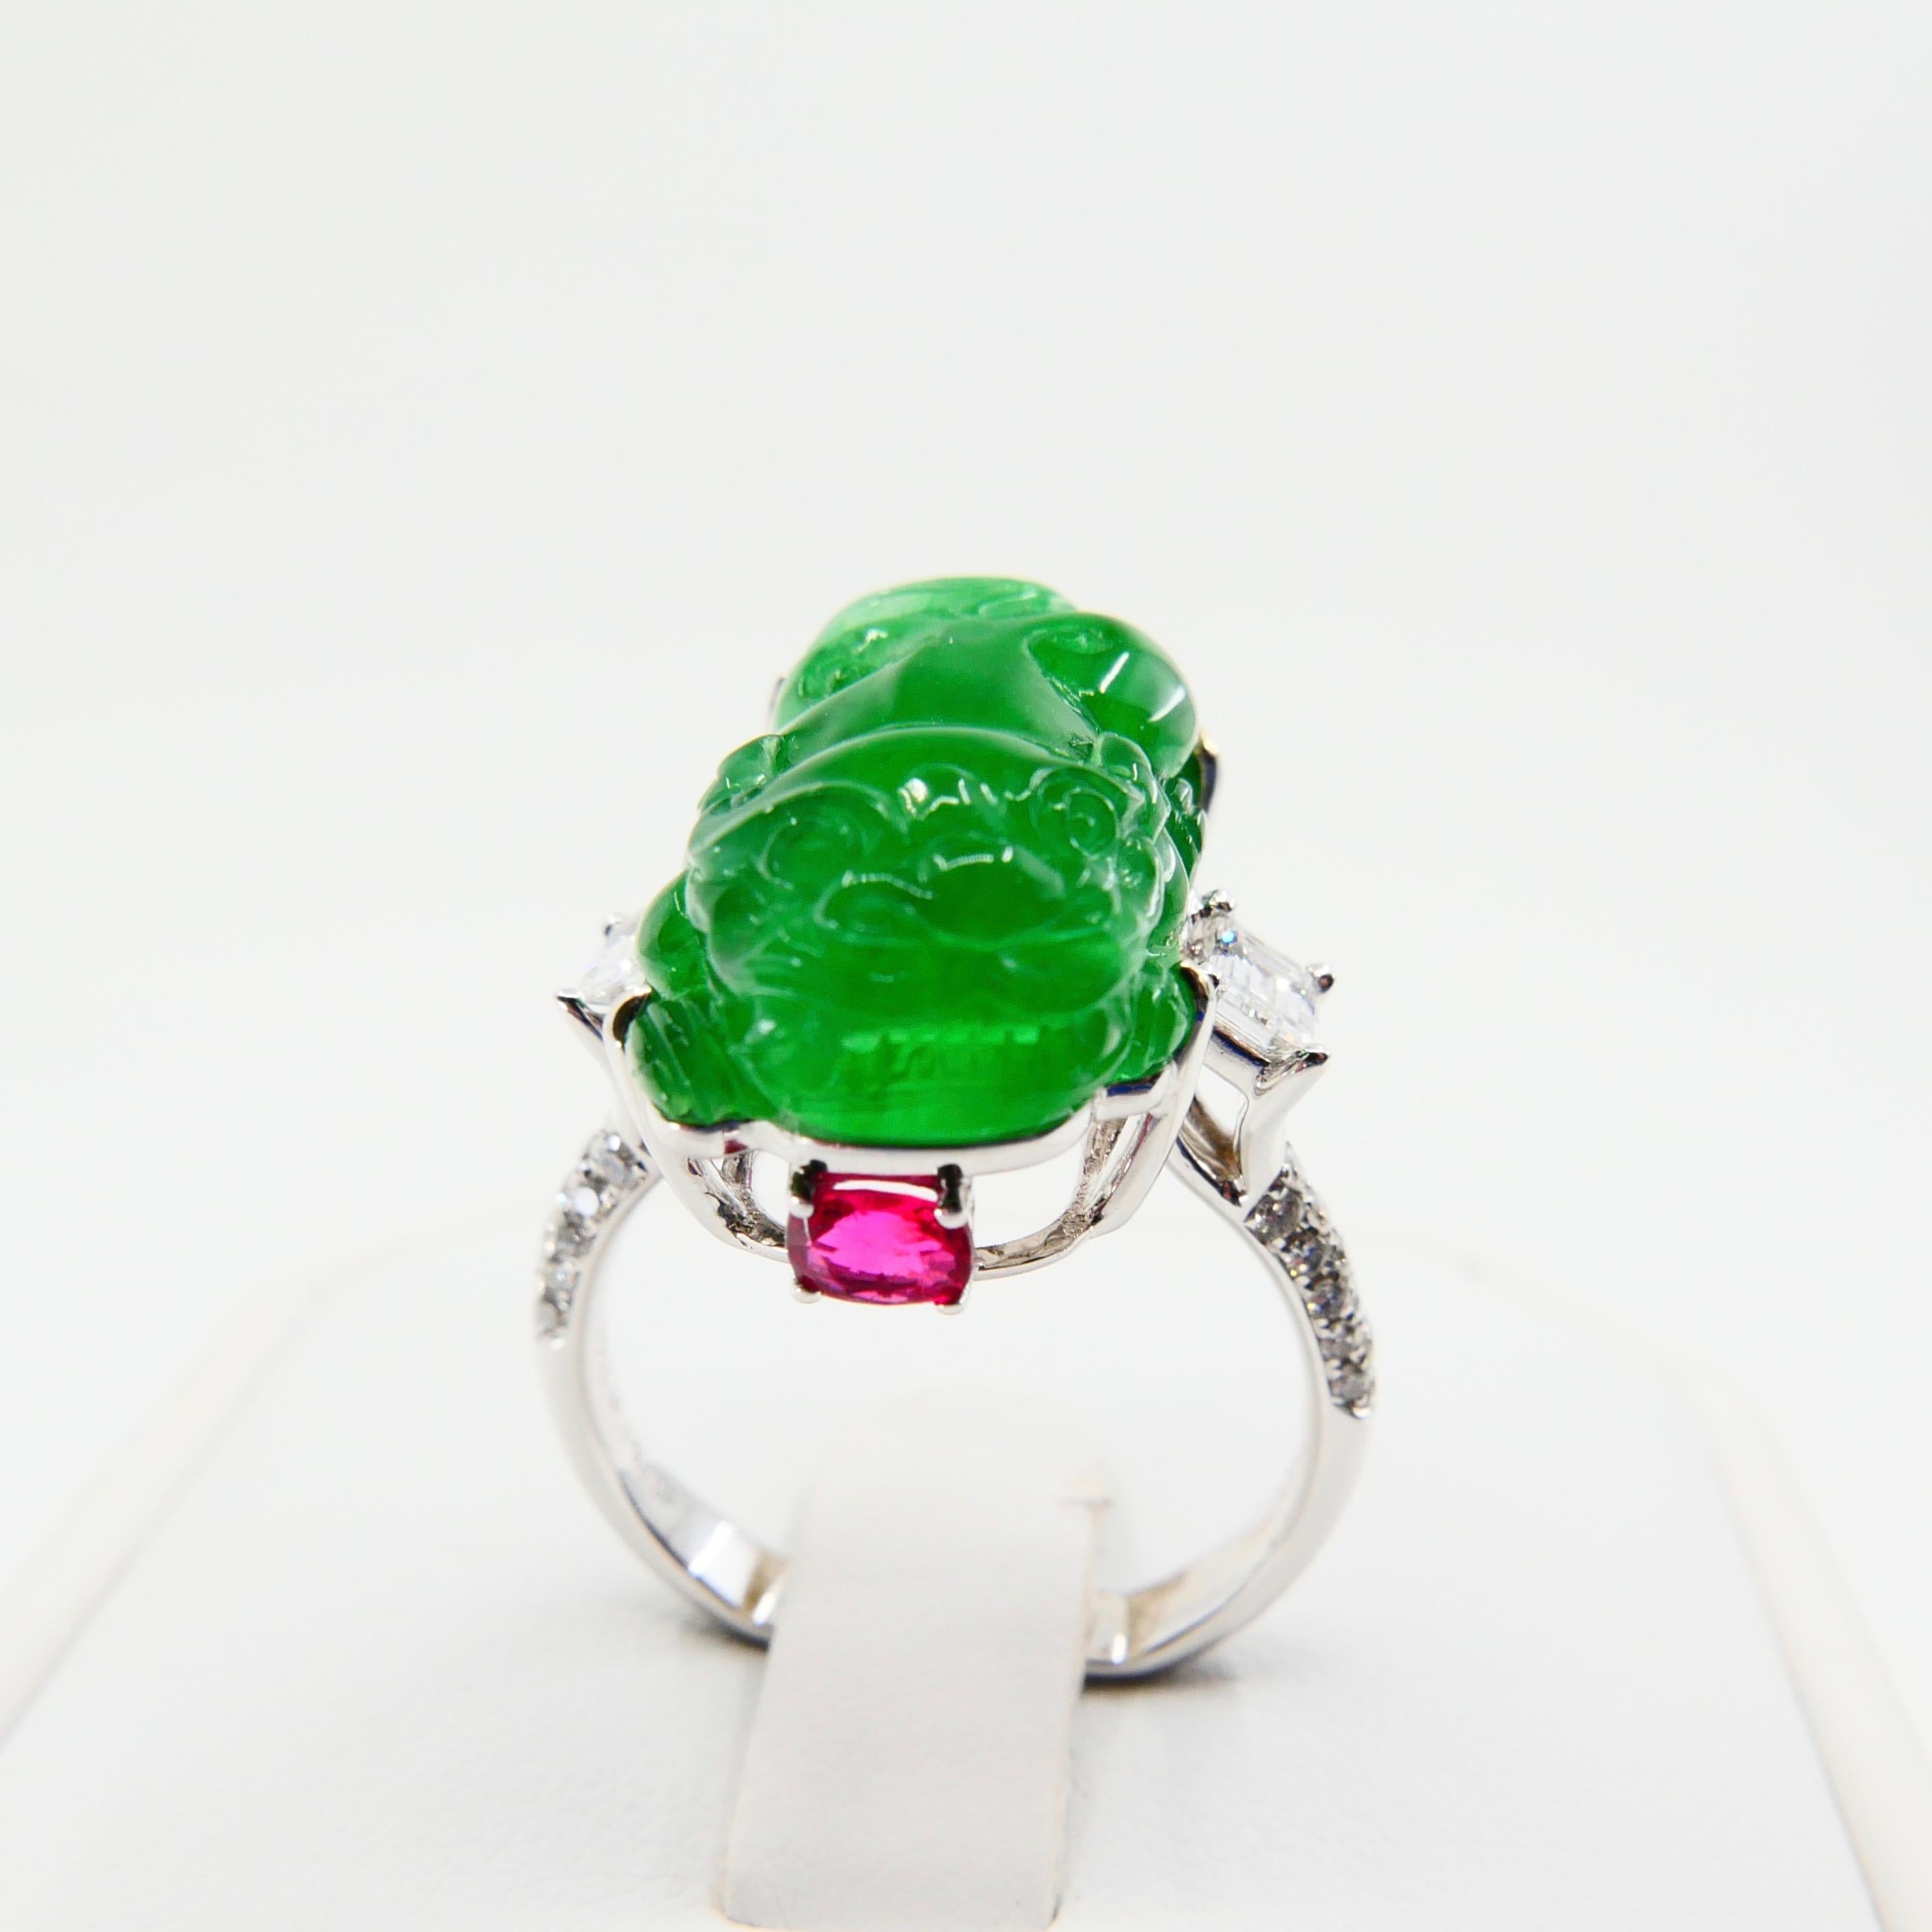 Certified Type A Jadeite Jade Spinel and Diamond Ring, Super Vivid Green Color 1